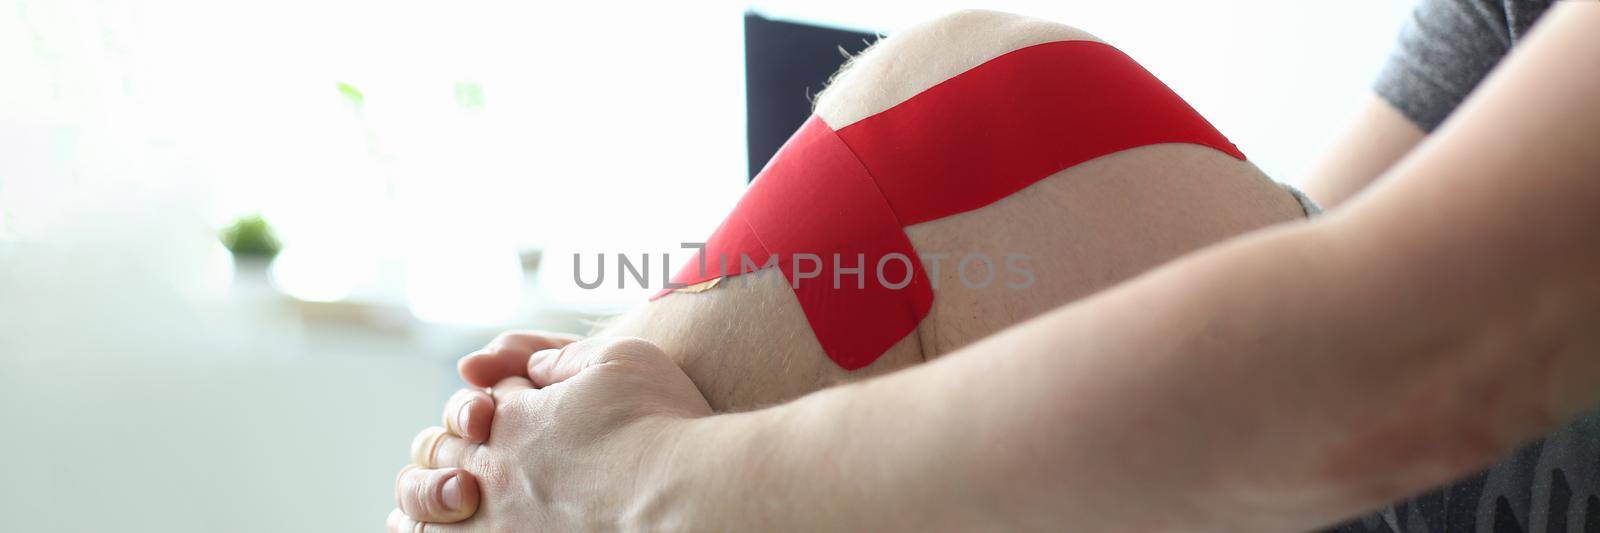 Therapeutic treatment of leg with red physio tape by kuprevich